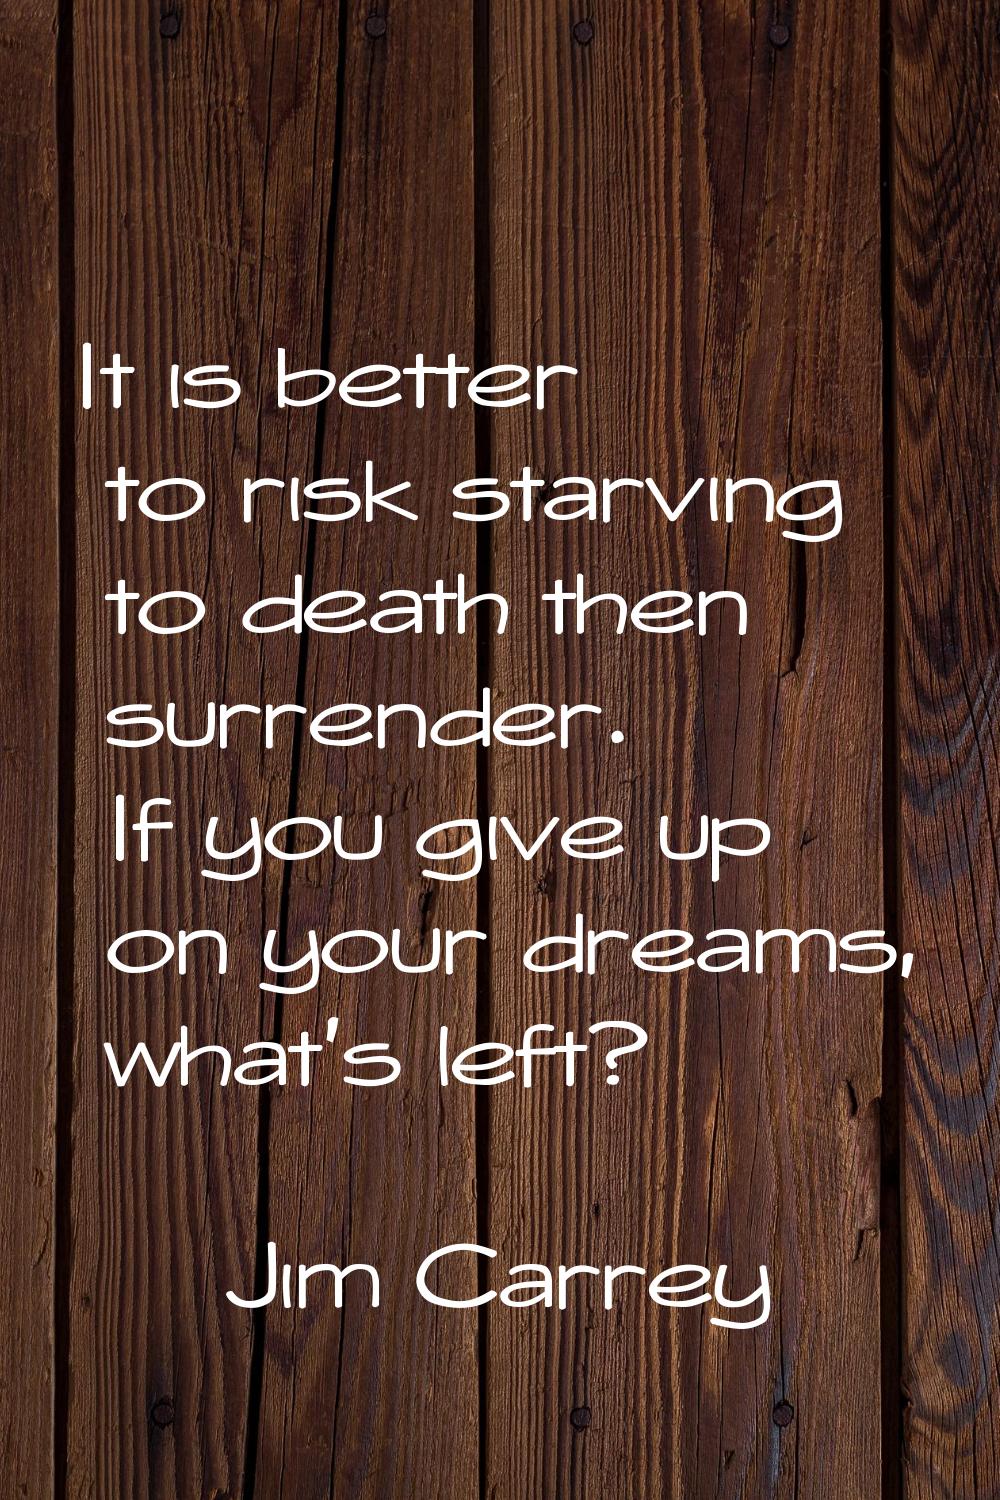 It is better to risk starving to death then surrender. If you give up on your dreams, what's left?